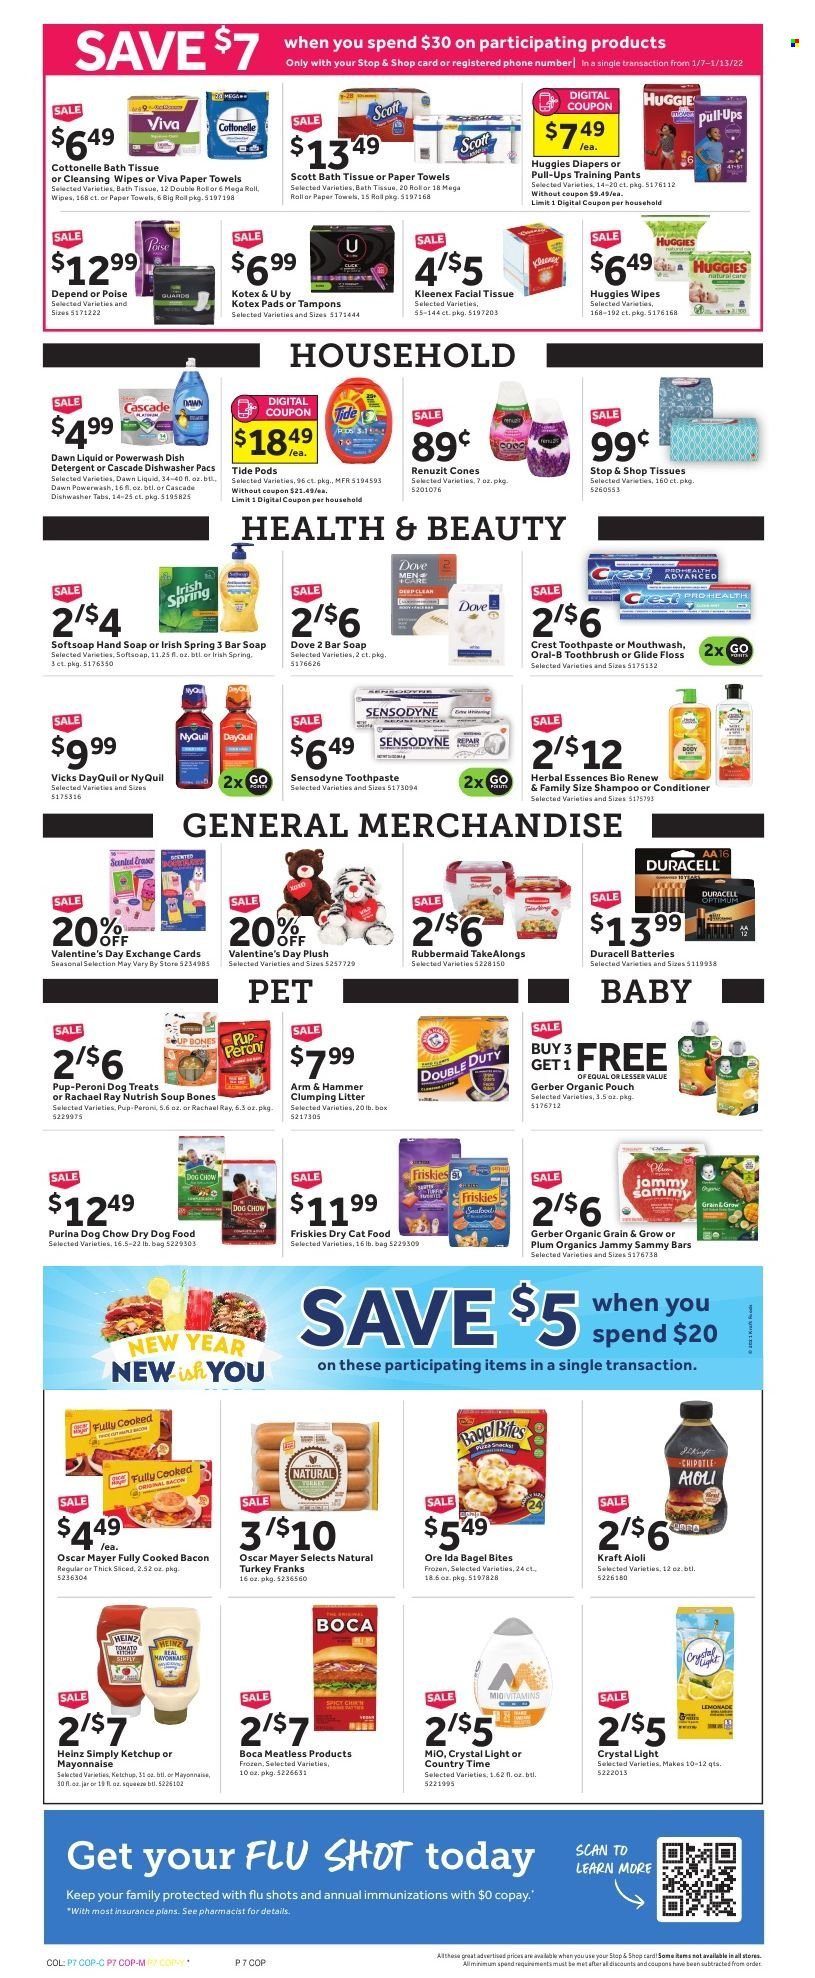 thumbnail - Stop & Shop Flyer - 01/07/2022 - 01/13/2022 - Sales products - bagels, soup, Kraft®, bacon, Oscar Mayer, mayonnaise, Ore-Ida, Gerber, ARM & HAMMER, Heinz, ketchup, Country Time, tea, cleansing wipes, wipes, Huggies, pants, nappies, baby pants, bath tissue, Cottonelle, Kleenex, Scott, kitchen towels, paper towels, Cascade, Tide, Dove, shampoo, Softsoap, hand soap, soap bar, soap, toothbrush, Oral-B, toothpaste, Sensodyne, mouthwash, Crest, Kotex, Kotex pads, tampons, conditioner, Herbal Essences, Vicks, jar, bag, eraser, Renuzit, battery, Duracell, cat litter, animal food, cat food, dog food, Dog Chow, Purina, dry dog food, dry cat food, Pup-Peroni, Friskies, Nutrish, DayQuil, NyQuil. Page 7.